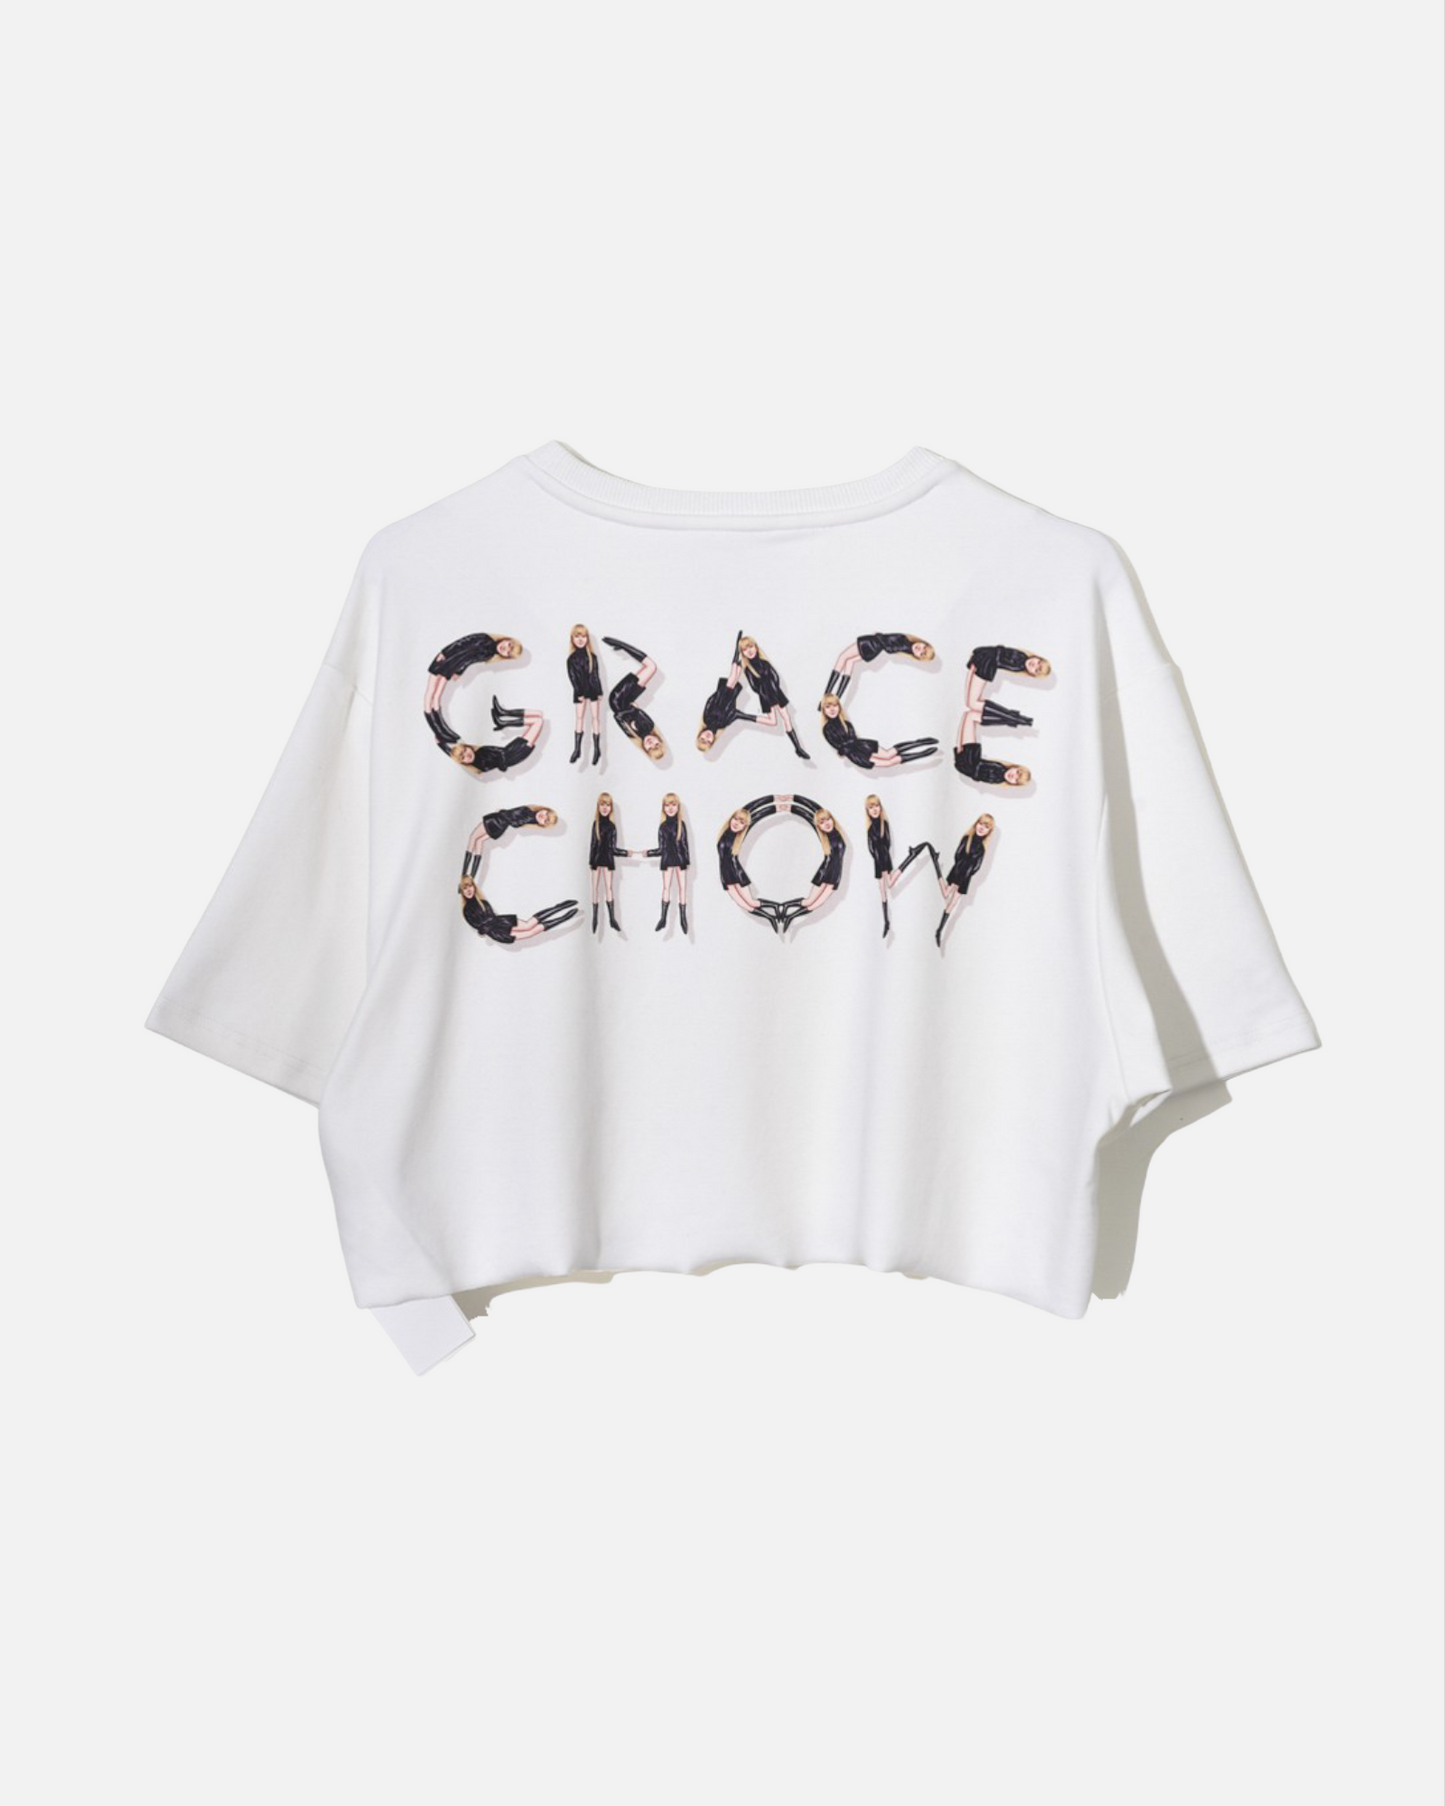 GRACE CHOW CROP TOP (WHITE)